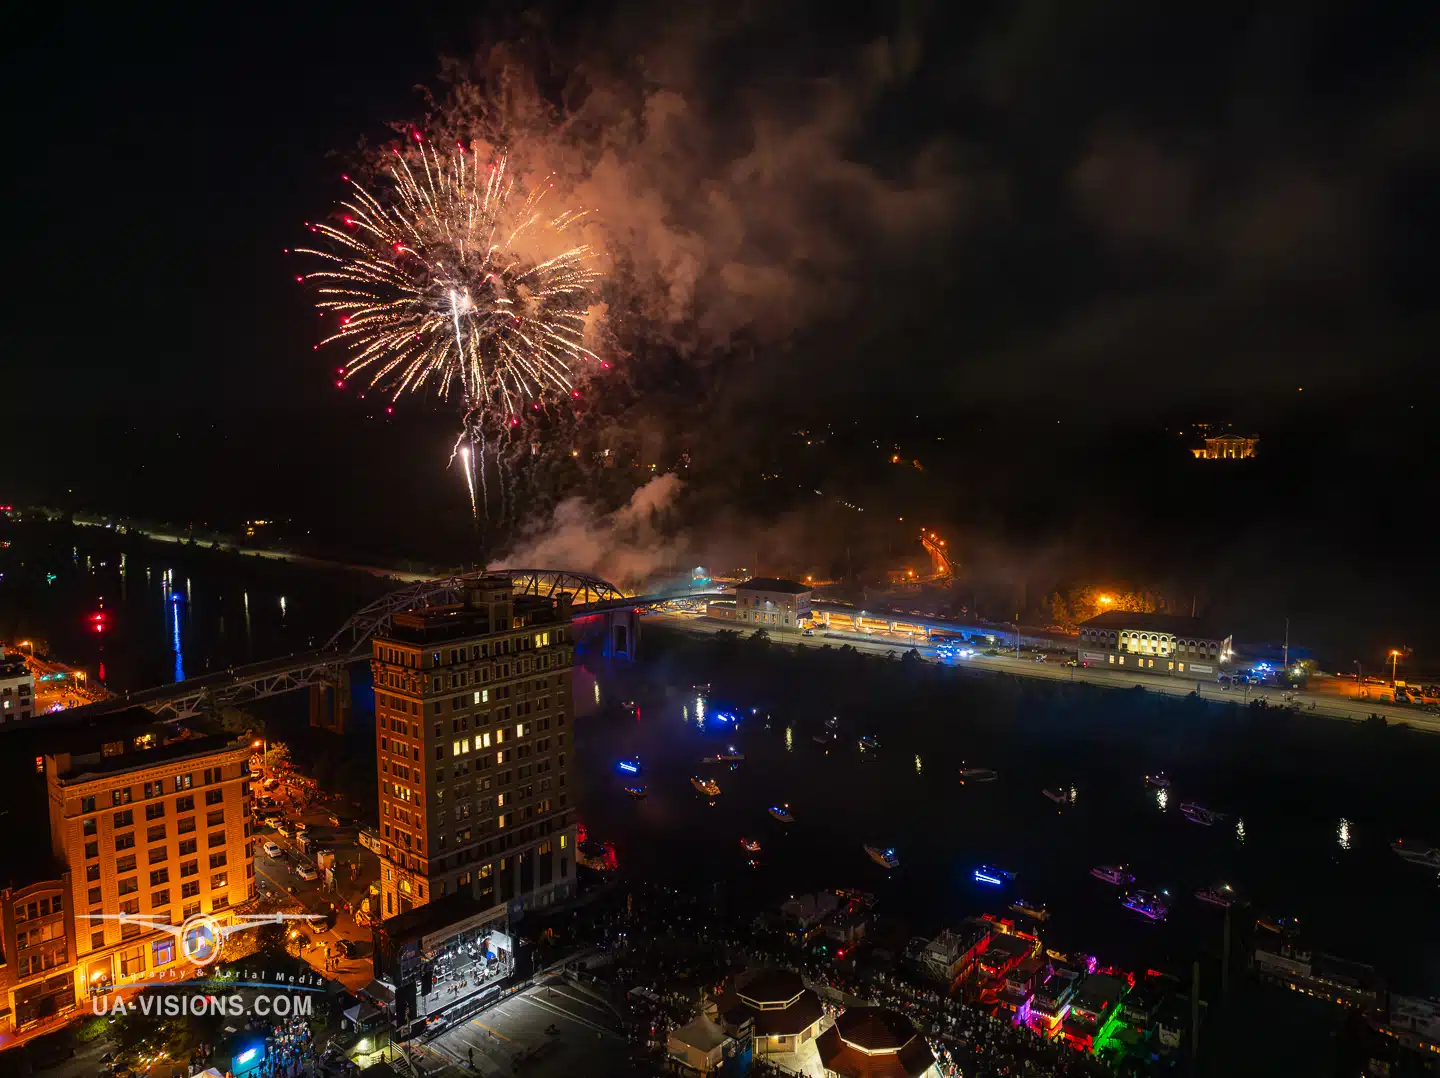 The 4th of July Fireworks at the 2024 Charleston Sternwheel Regatta taken by the UA-Visions Team